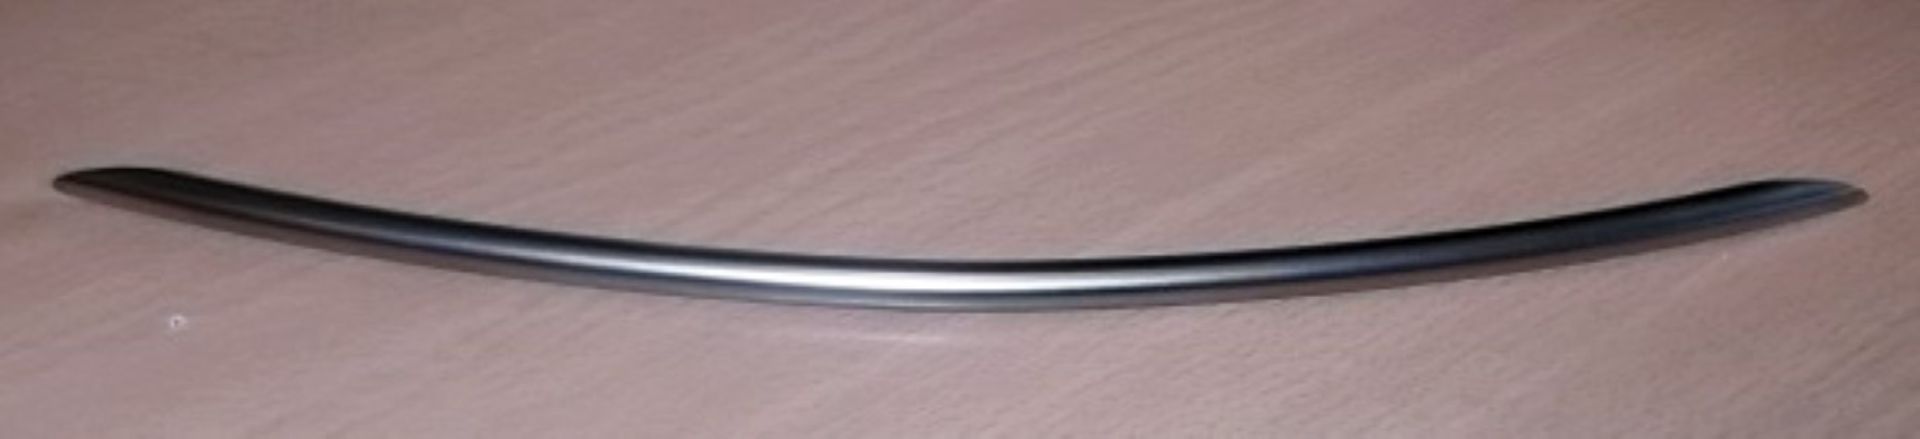 400 x BOW Handle Kitchen Door Handles By Crestwood - 320mm - New Stock - Brushed Nickel Finish - - Image 5 of 8